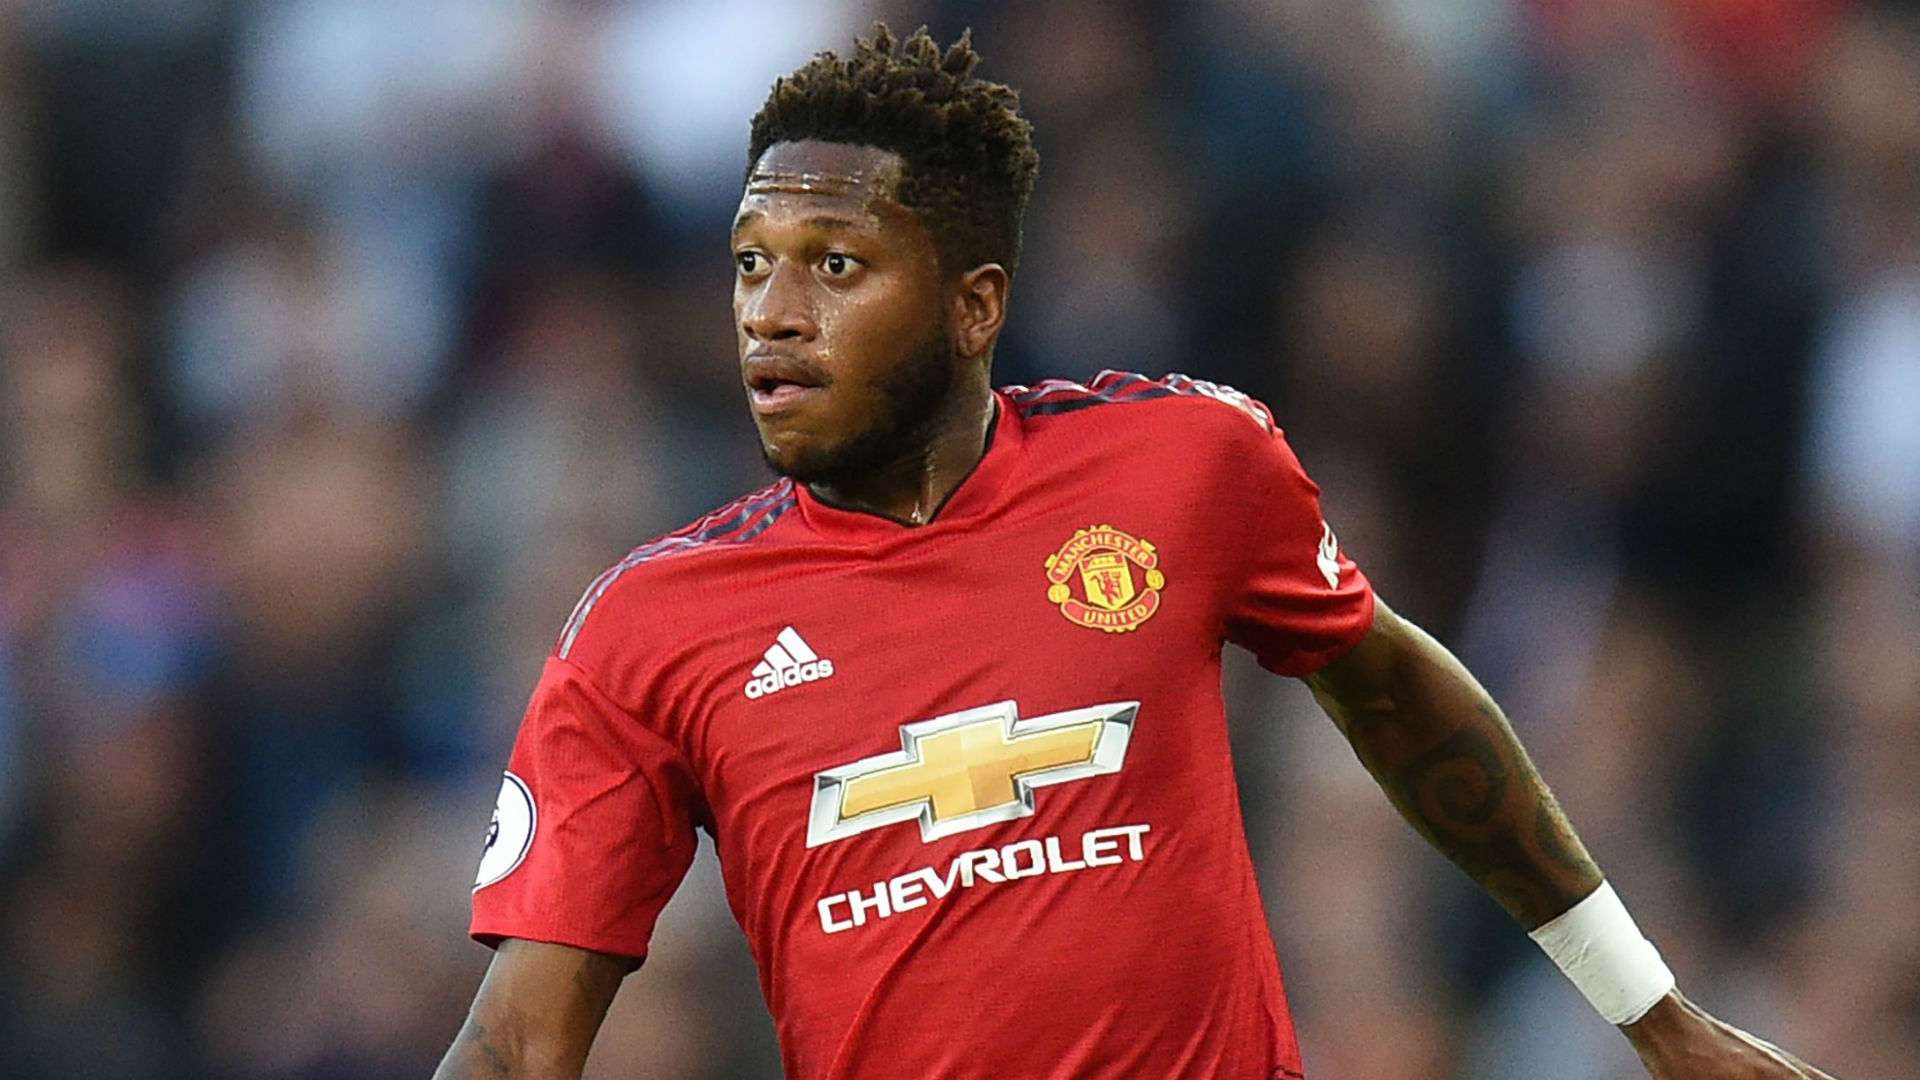 Fred Manchester United Leicester Premier League 10 08 2018